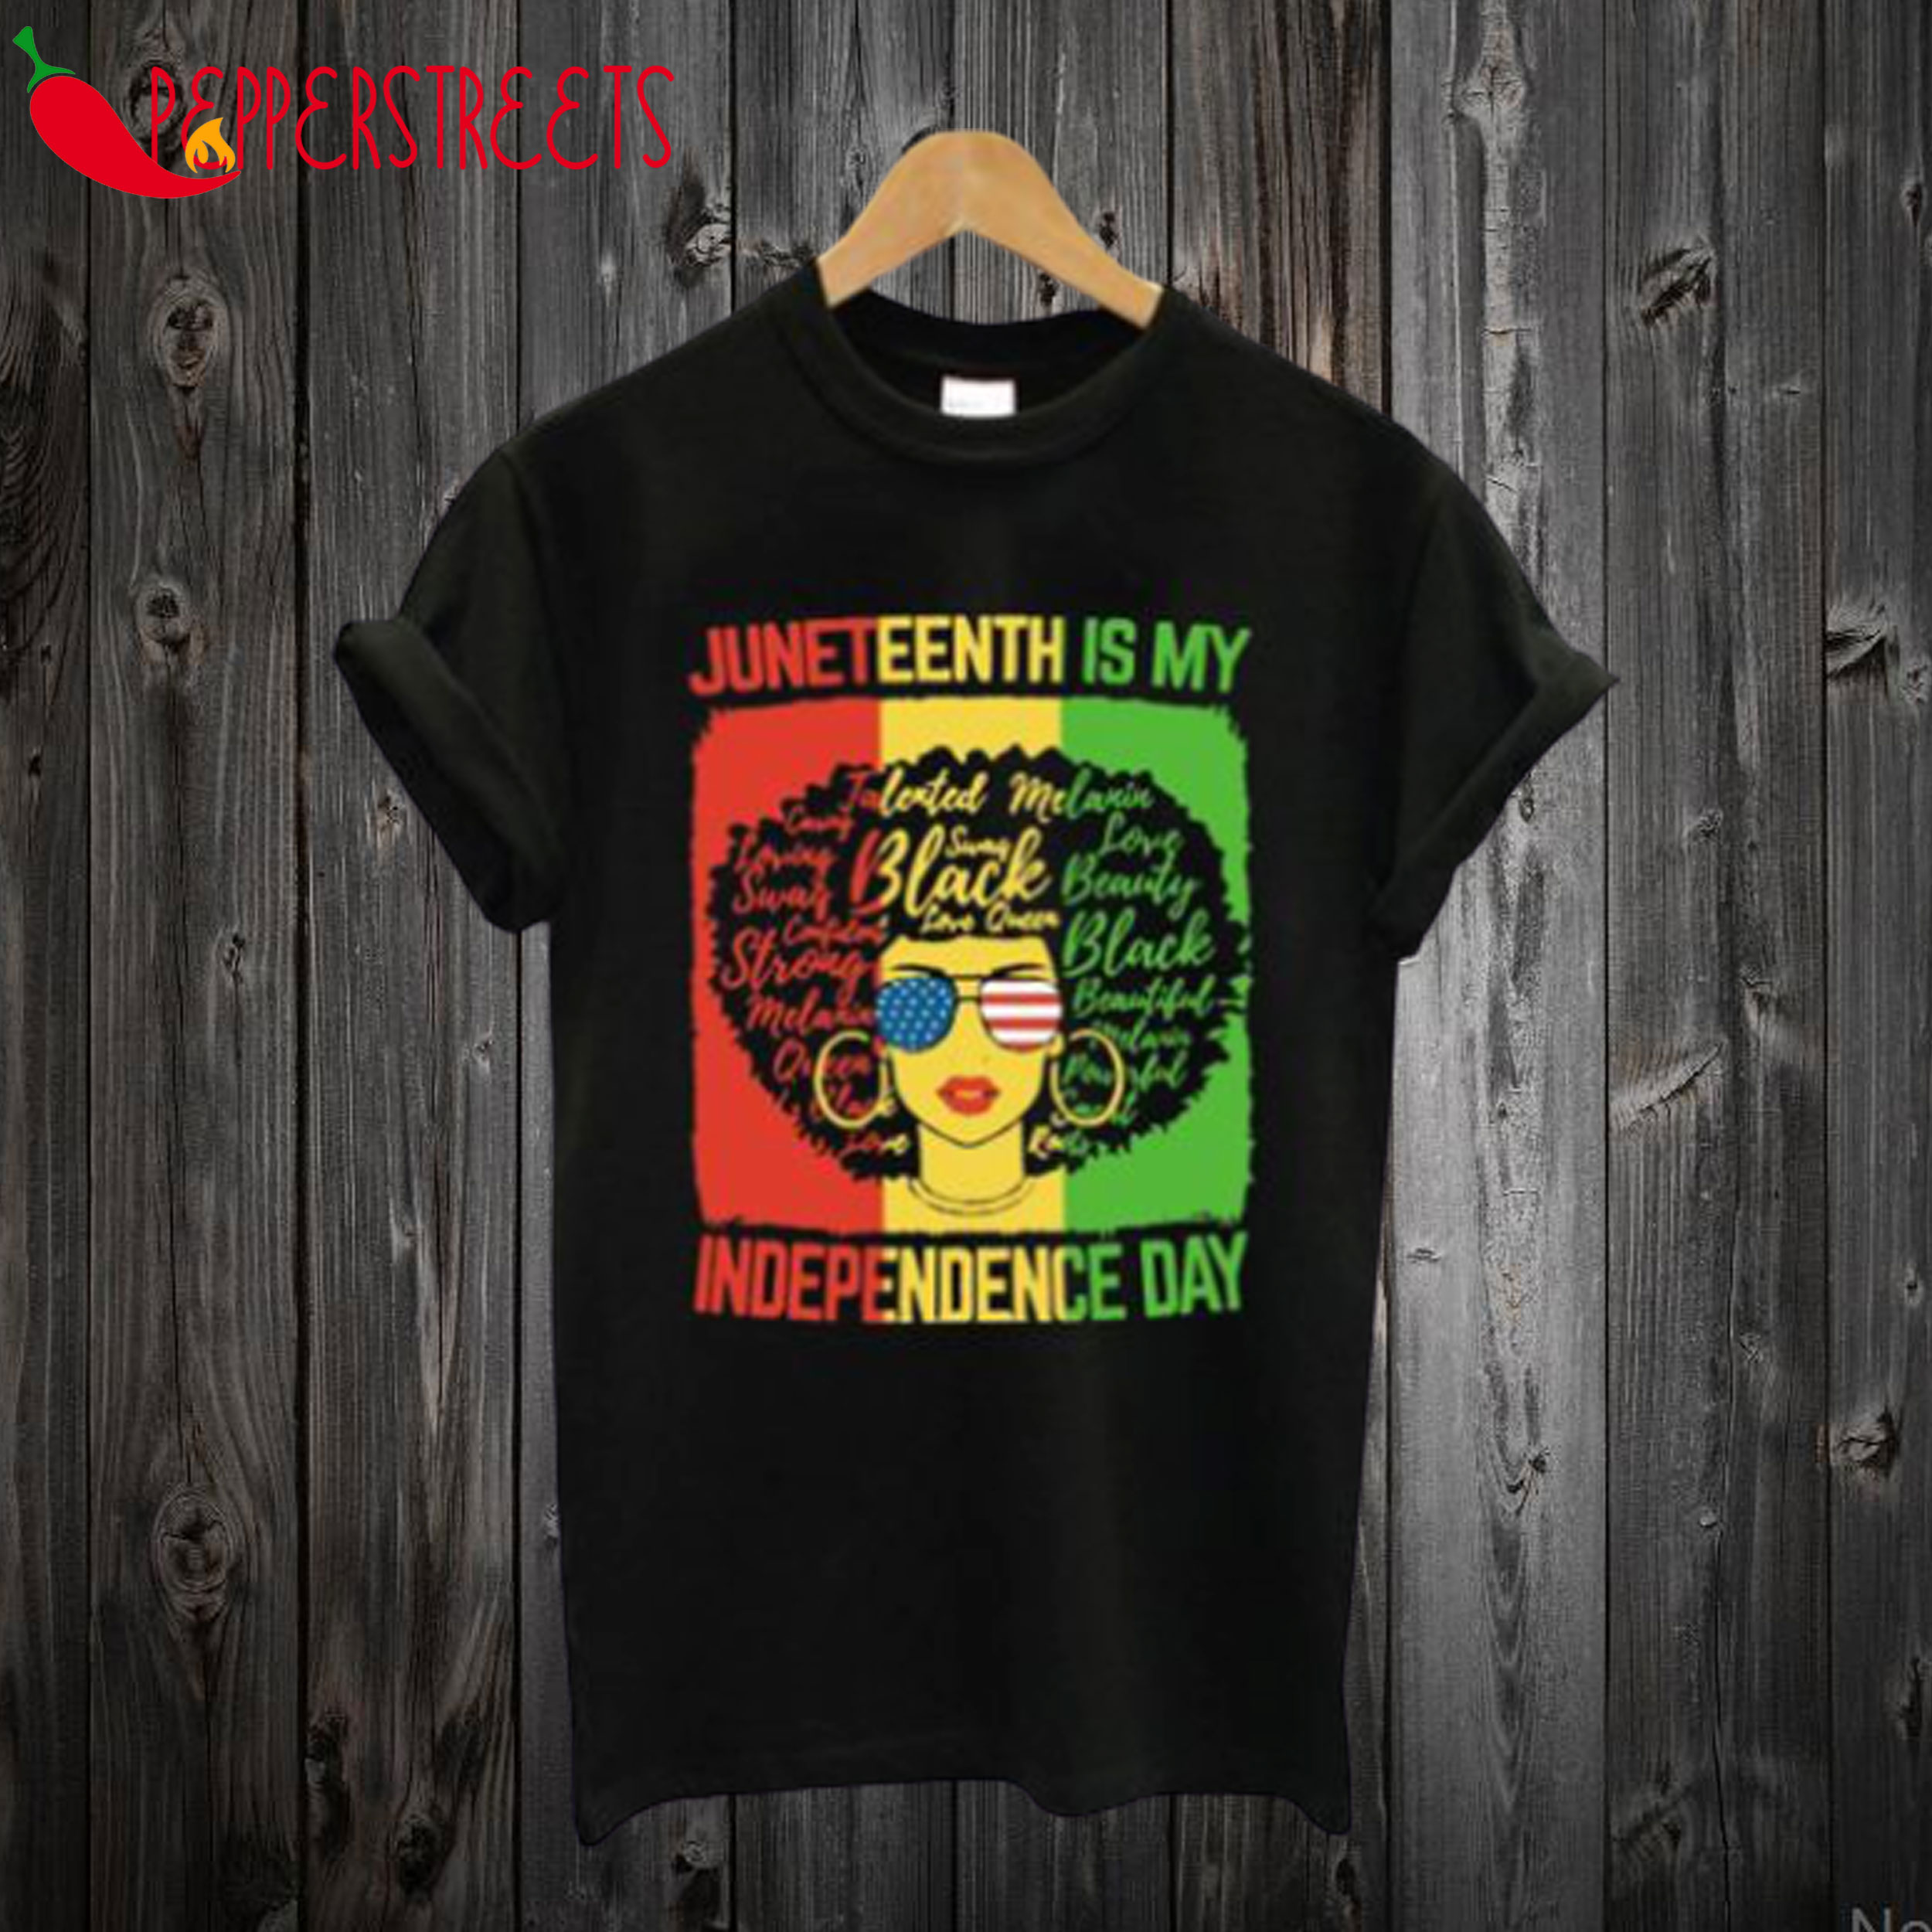 Juneteenth is my independence day T-Shirt